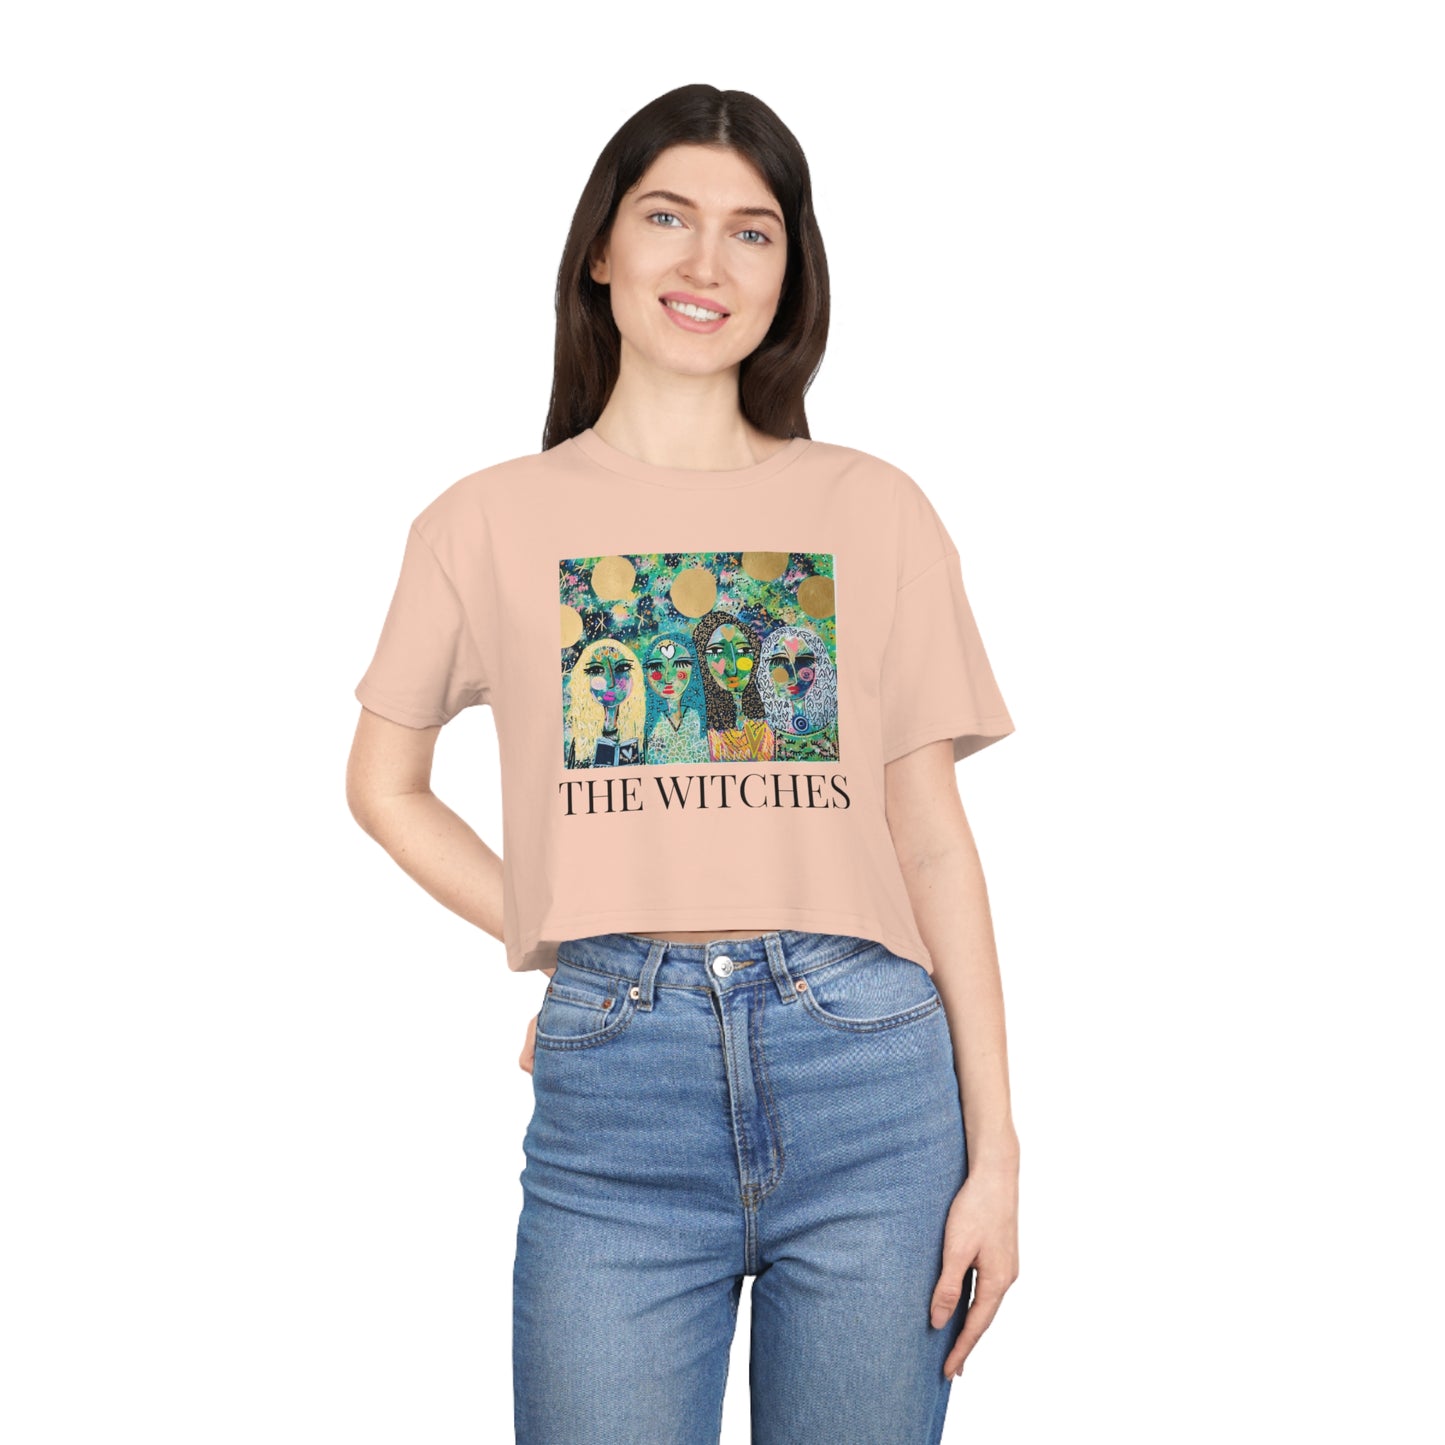 "THE WITCHES" Women's Crop Tee